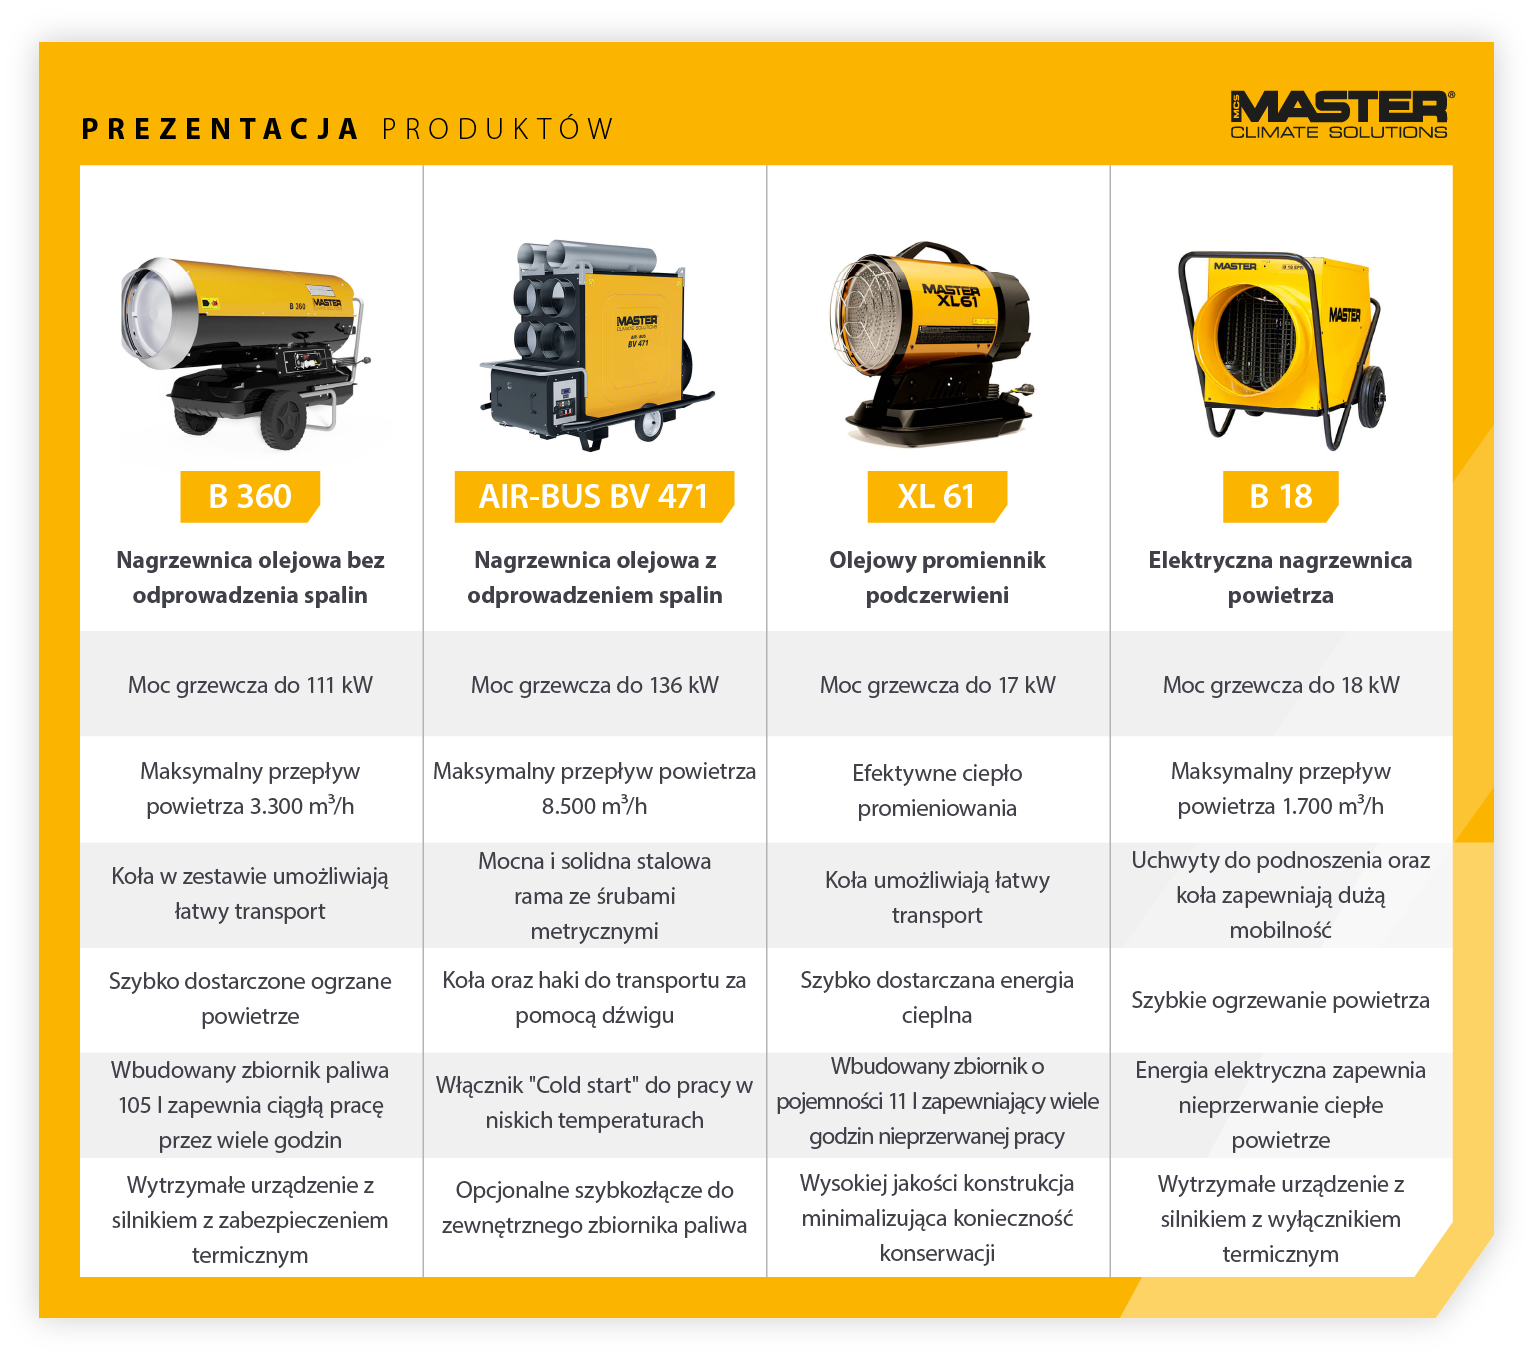 Product showcase comparing features of direct fired, indirect fired, infrared and electric heaters for construction - Infographic